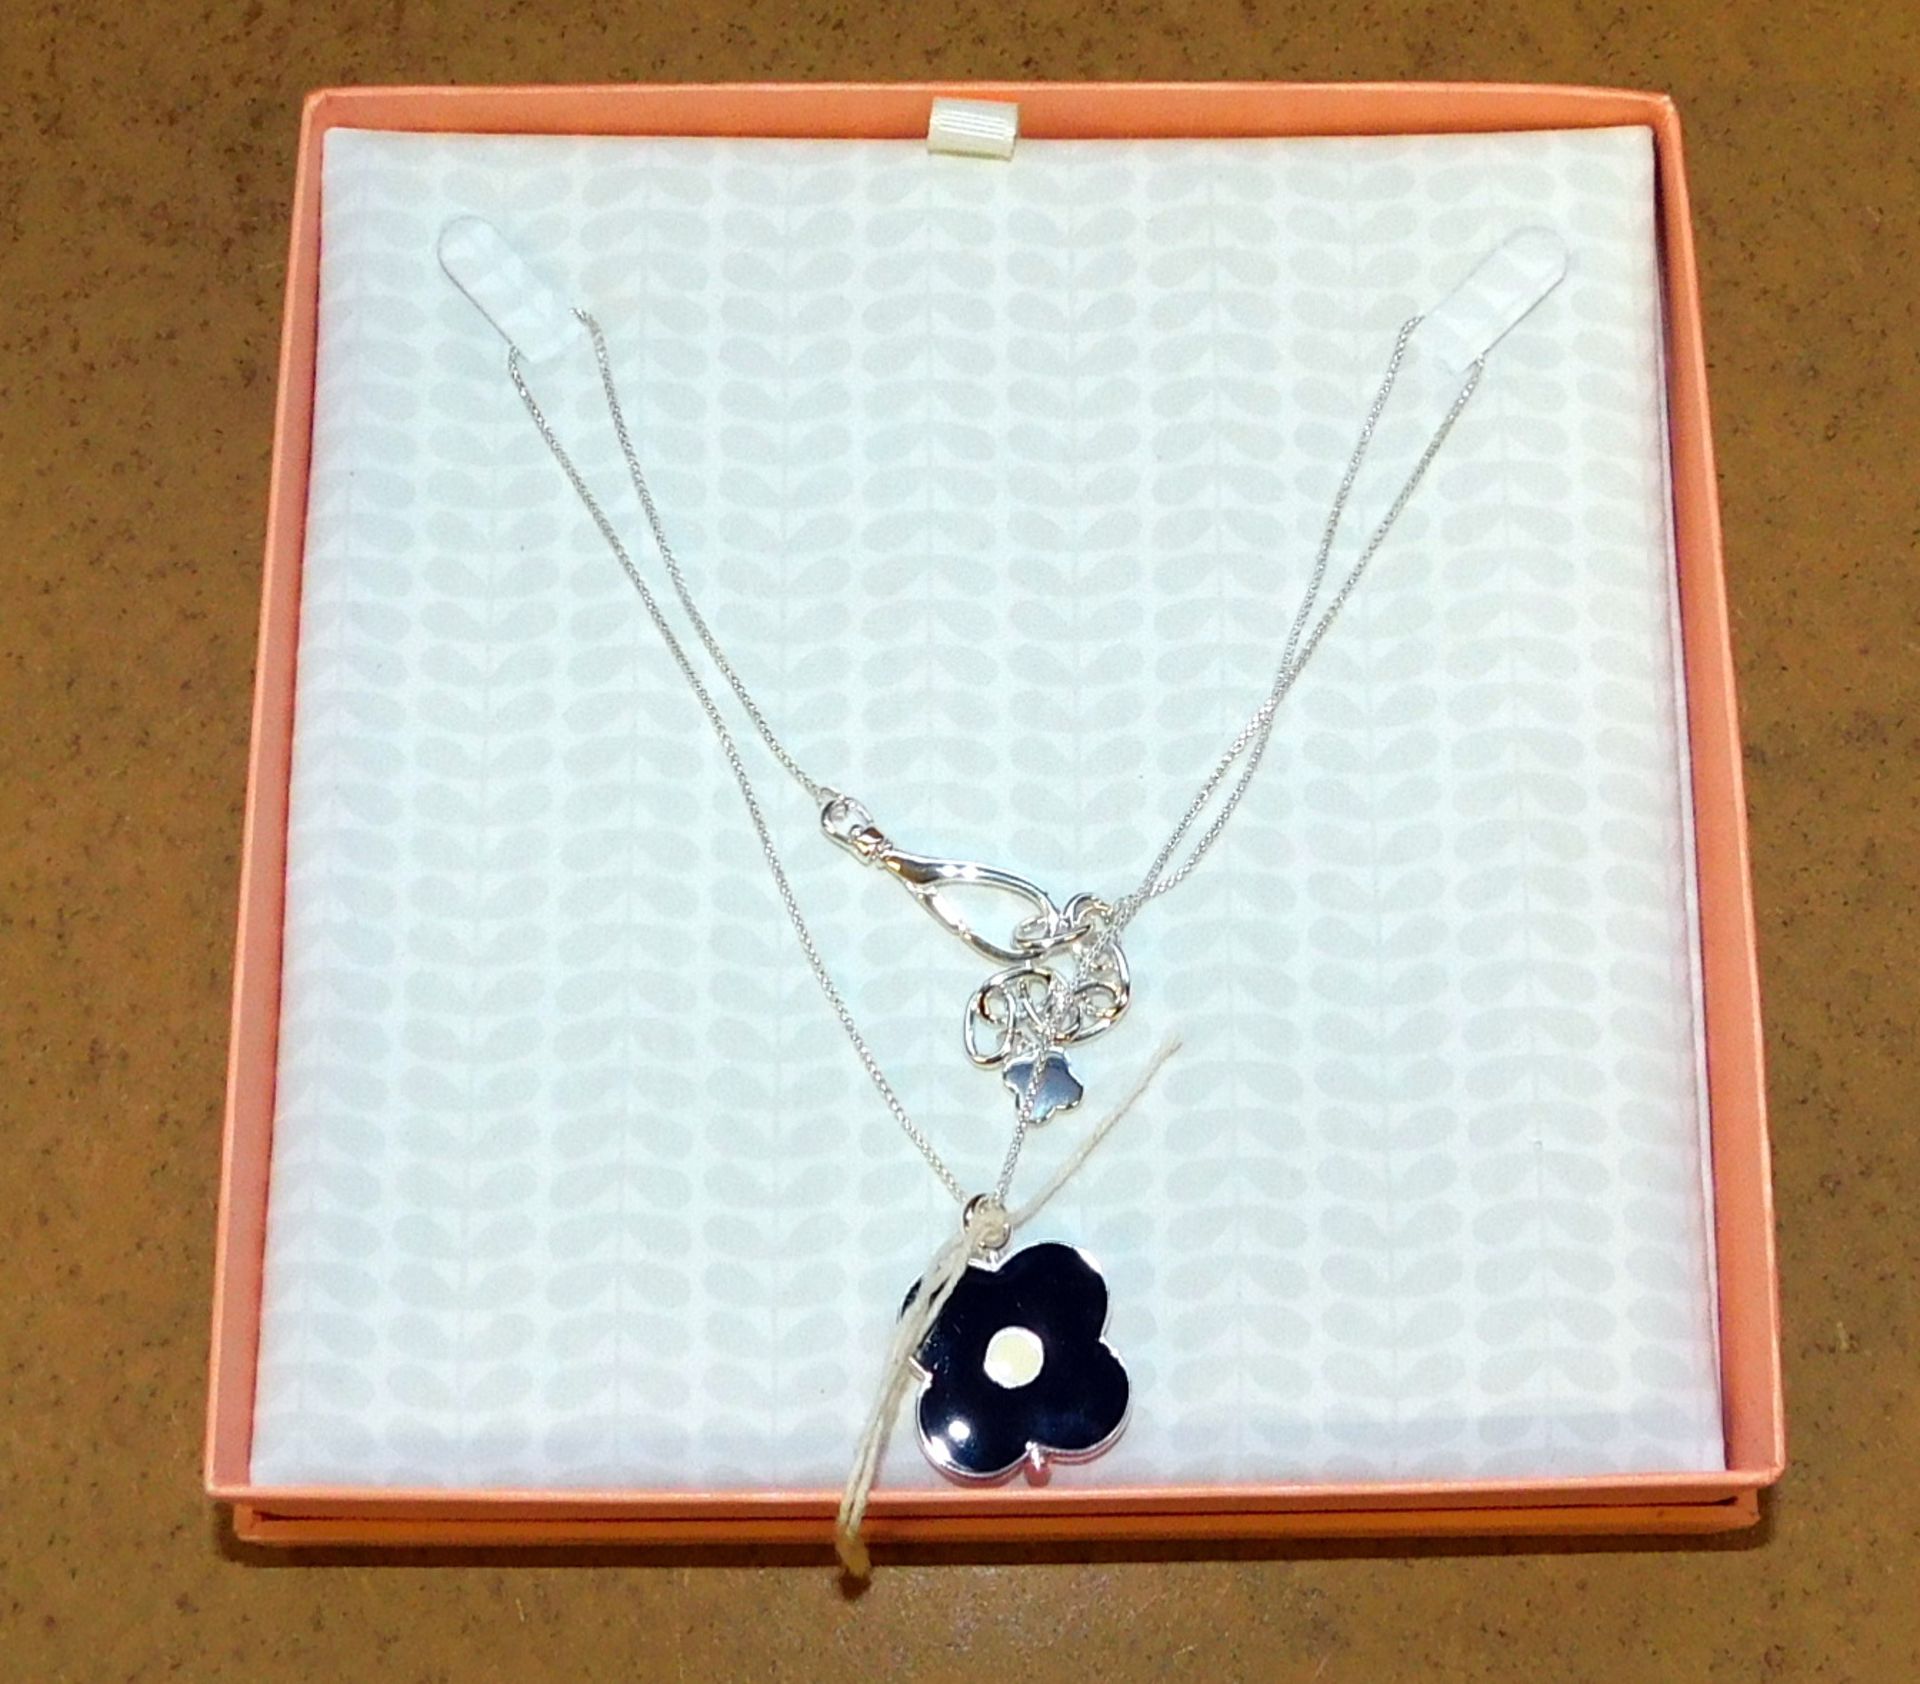 Orla Kiely Sterling Silver Plated Short Necklace, Abacus Flower, Navy Cream (RRP £75) - Image 2 of 2